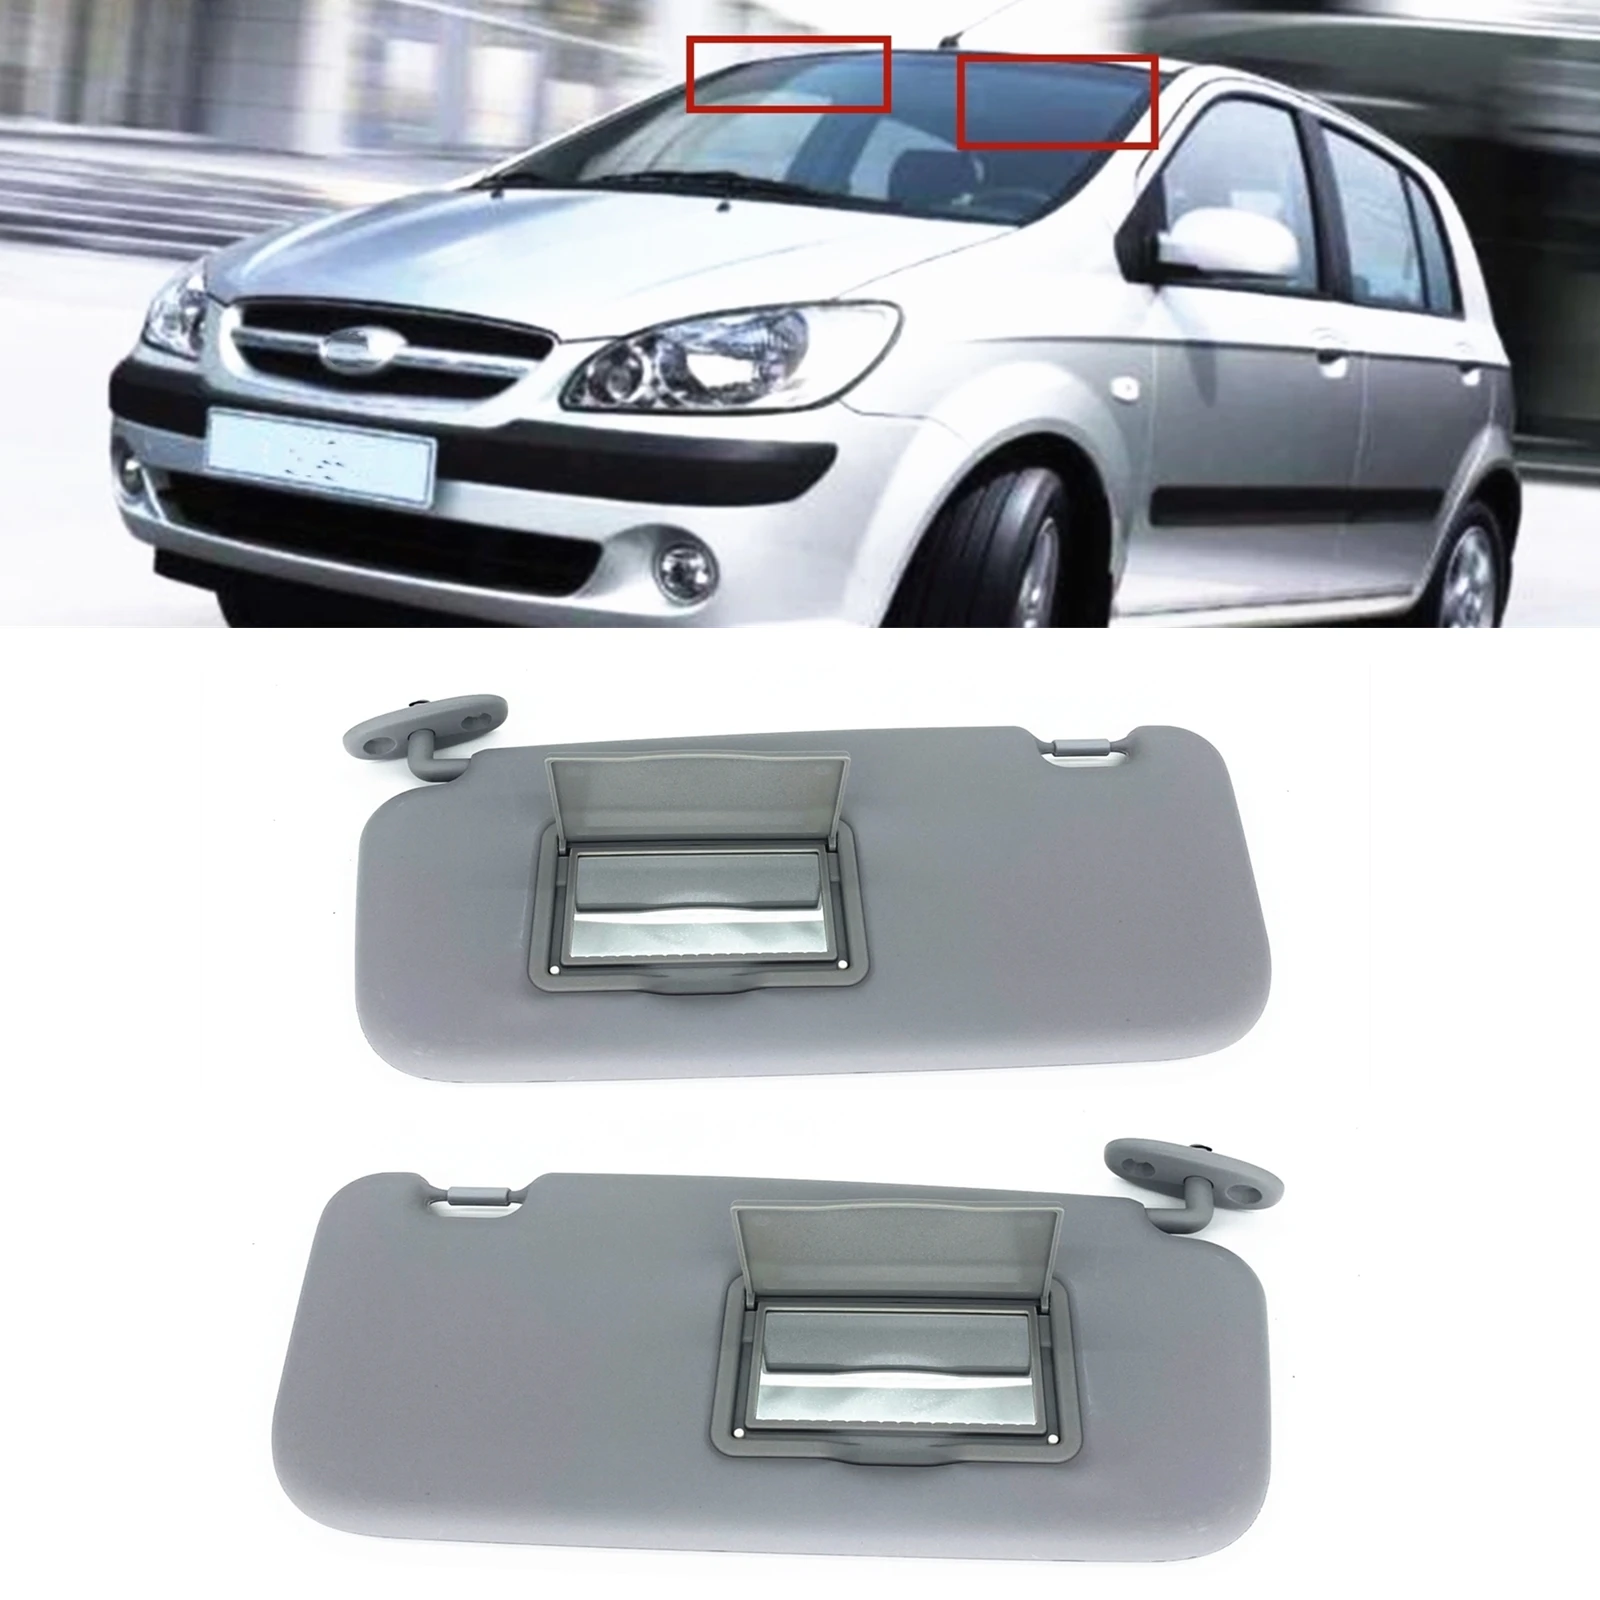 

Car Left Right Front Sun Visor Blind Cover Shield Sunshade Shade With Mirror For Hyundai Getz 2002-2012